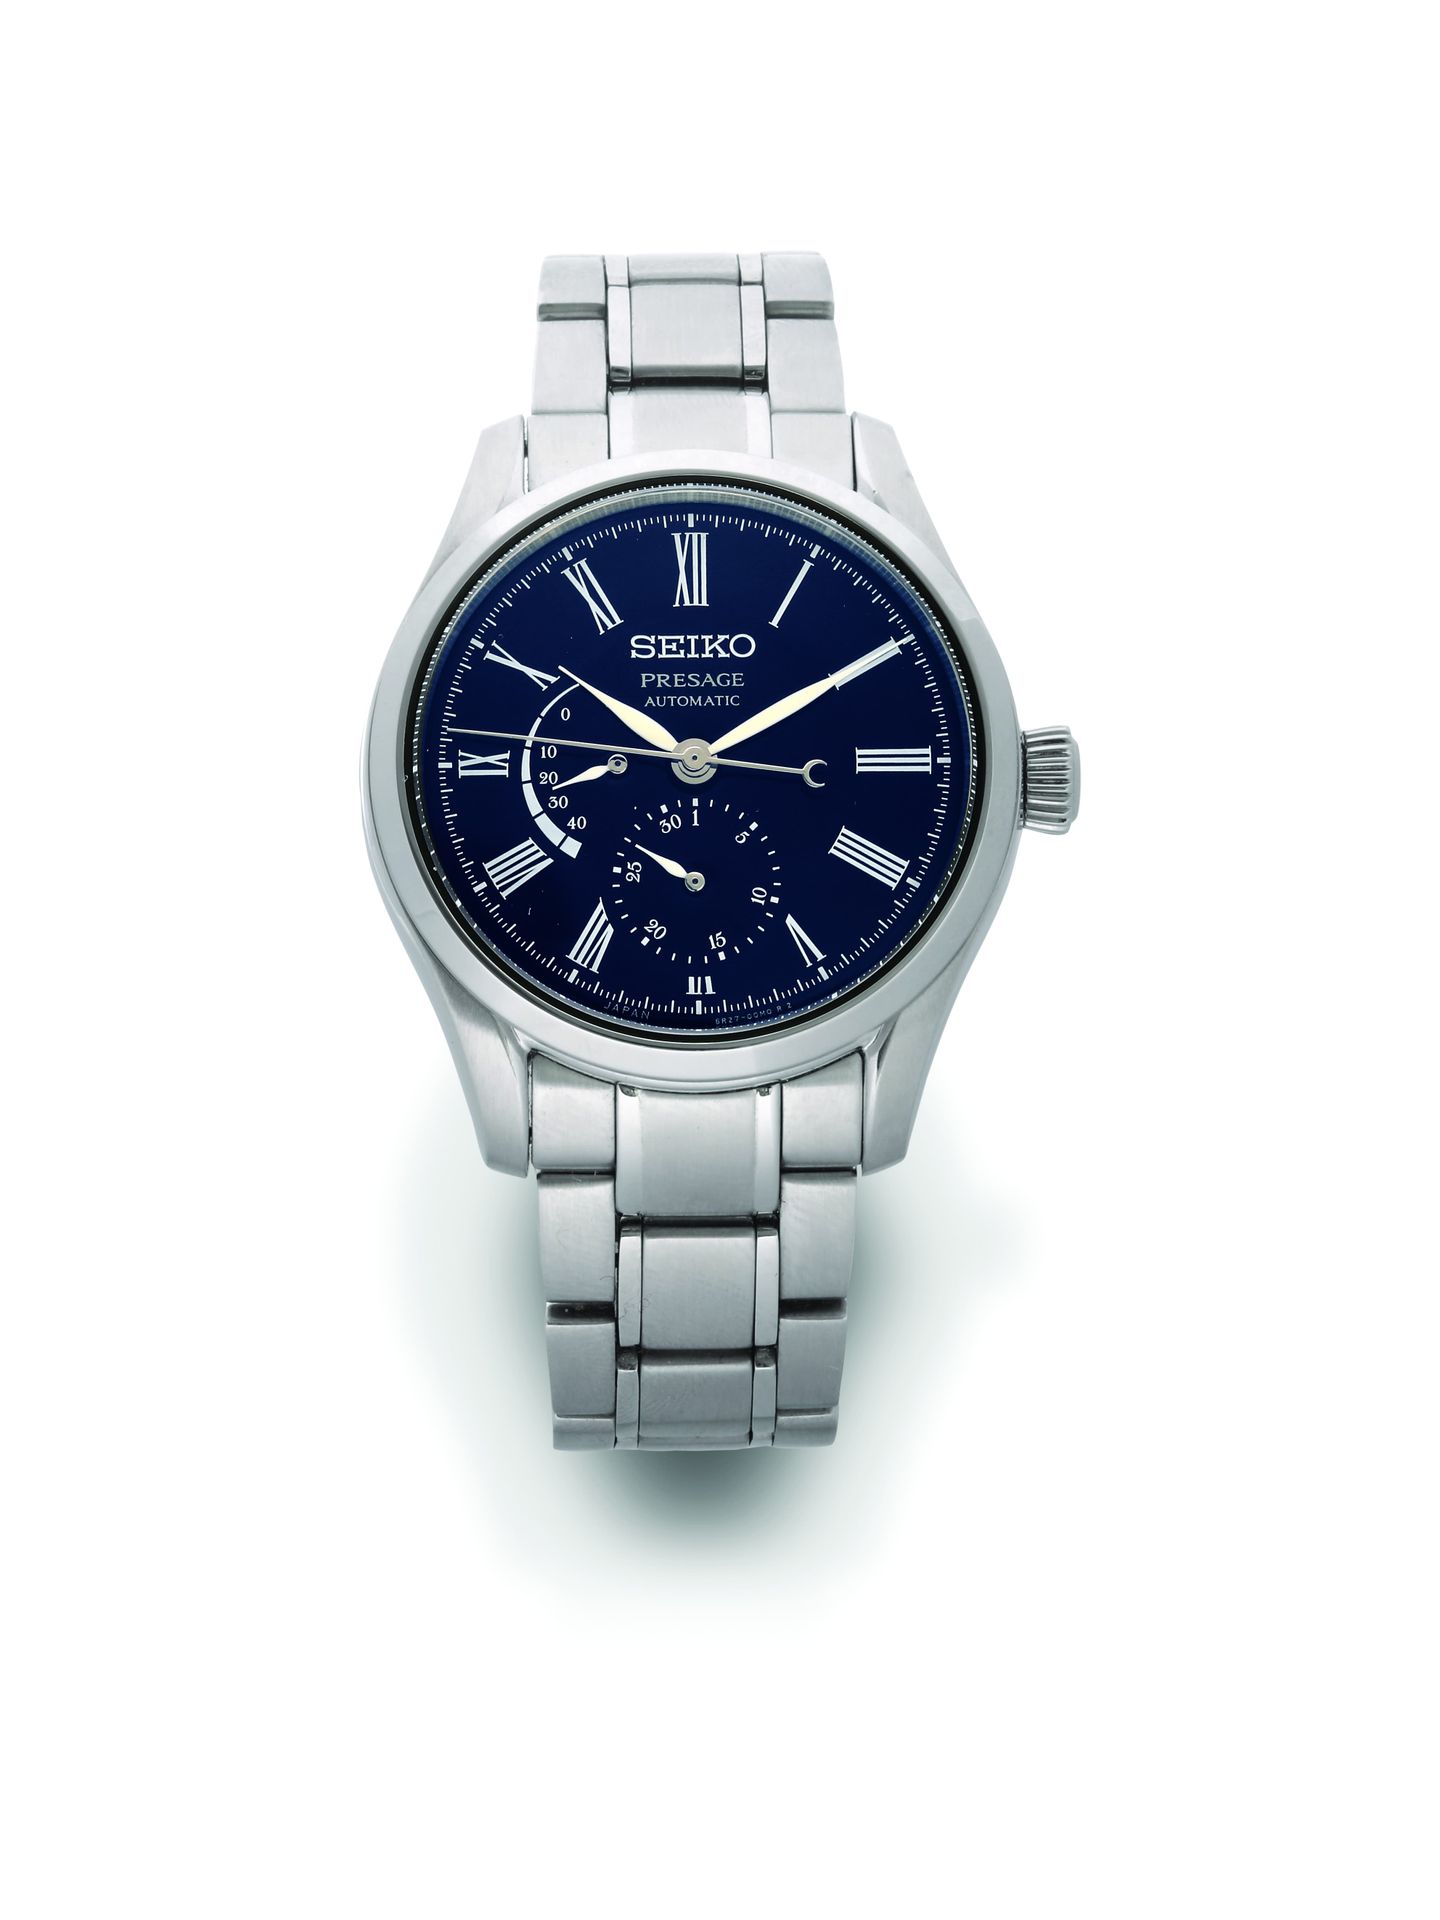 SEIKO Presage power reserve
Steel dress watch with automatic movement - Round st&hellip;